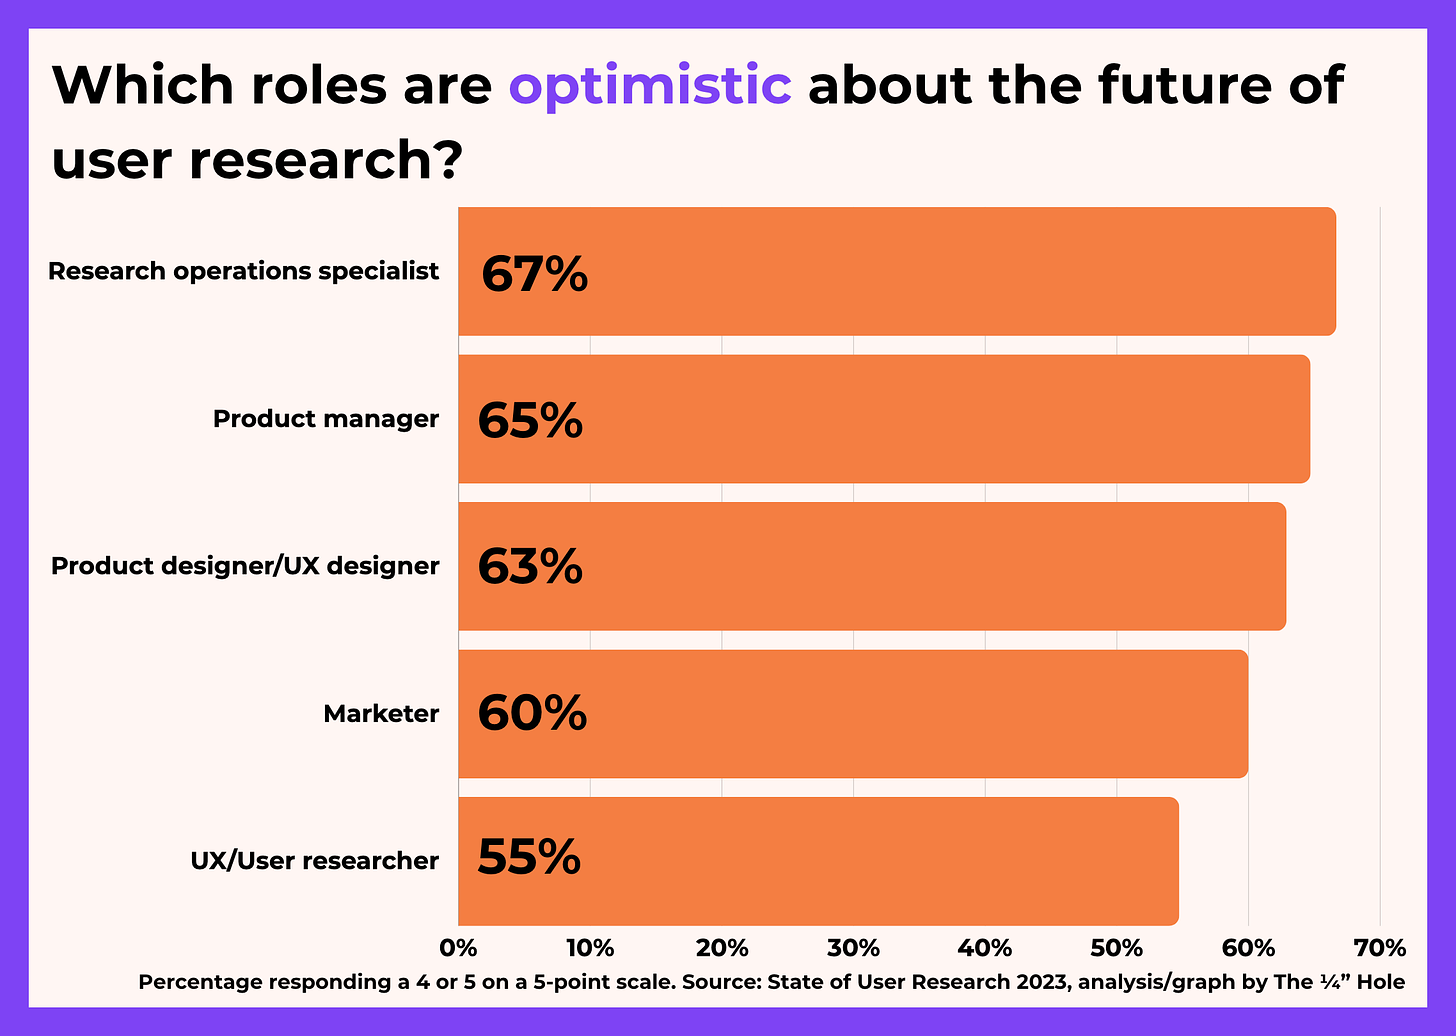 A bar chart representing the percentage of participants responding a 4 or 5 on a 5-point scale (higher being more optimistic) in response to a question about the future of user research. Research Ops is the highest at 67% and UX Research is the lowest at 55%.